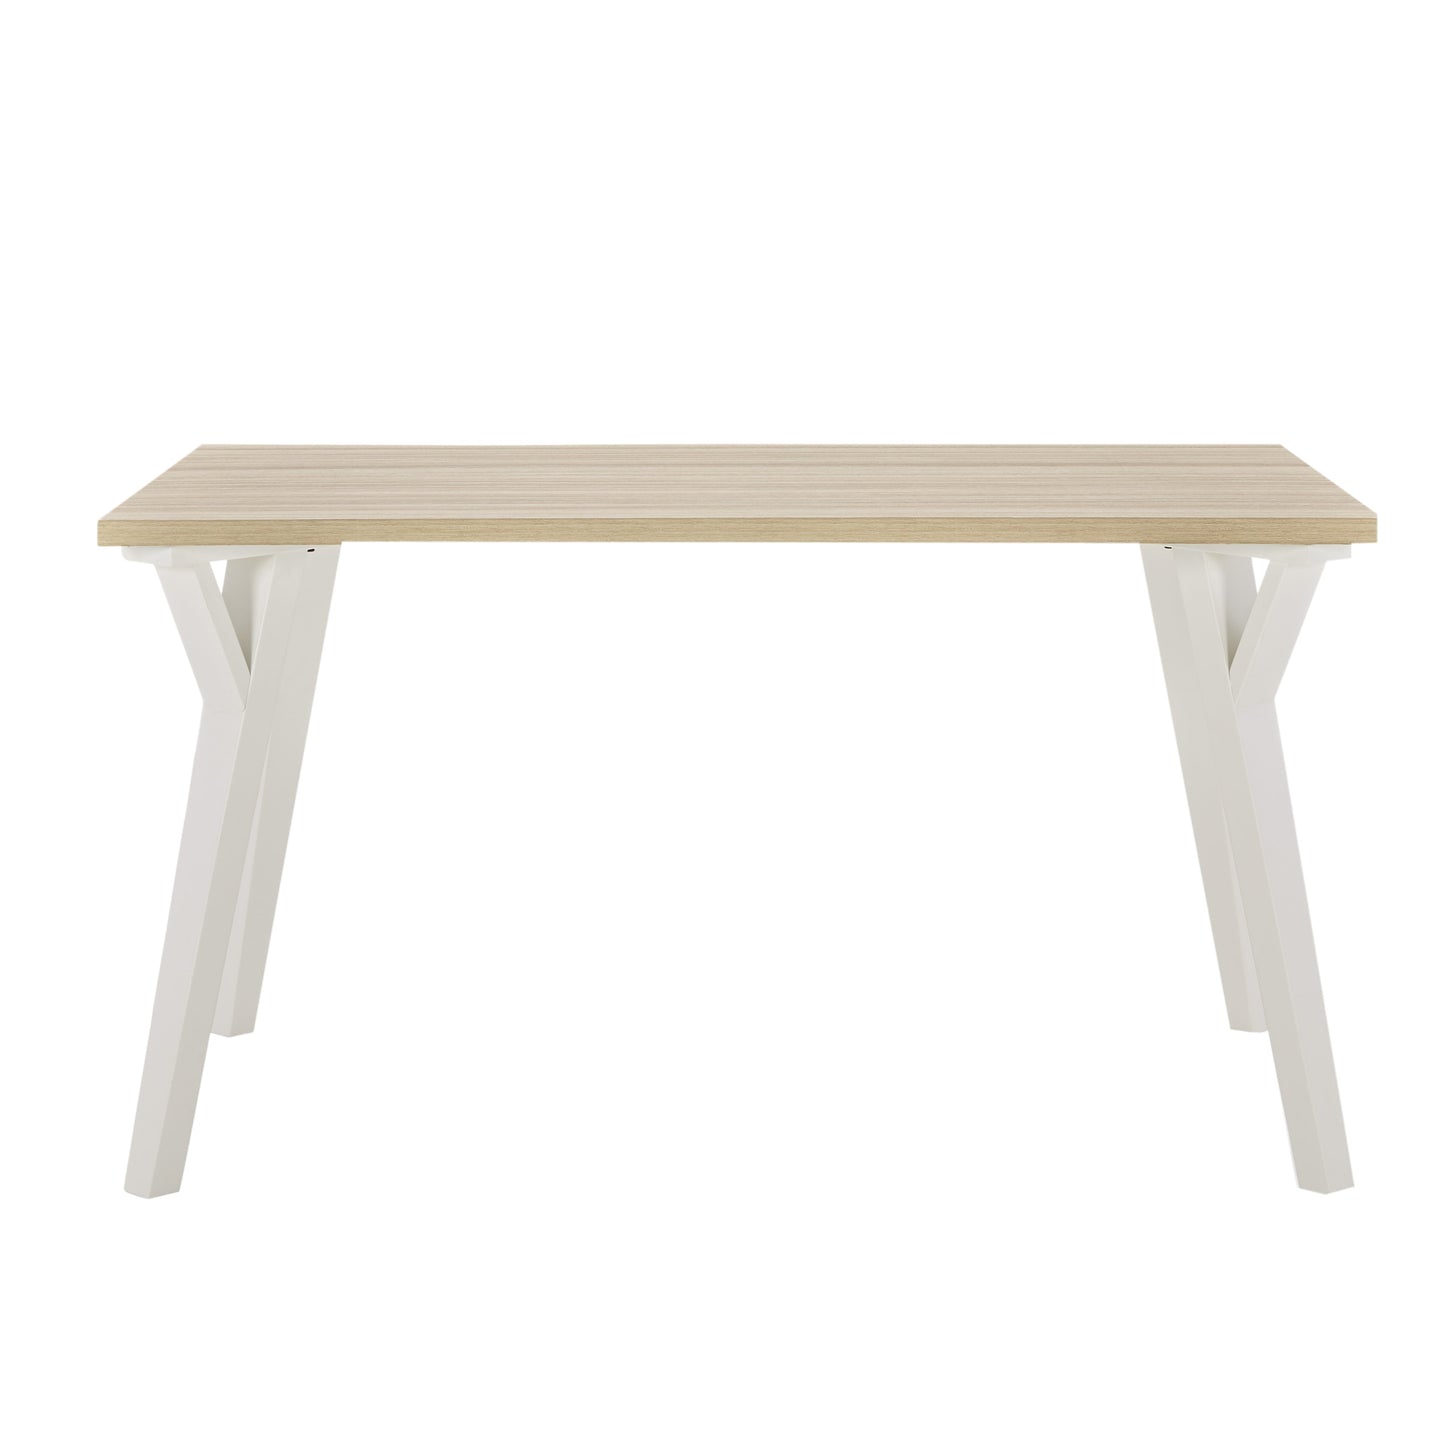 Alwynn Contemporary Rectangular Dining Table, White and Natural Wood